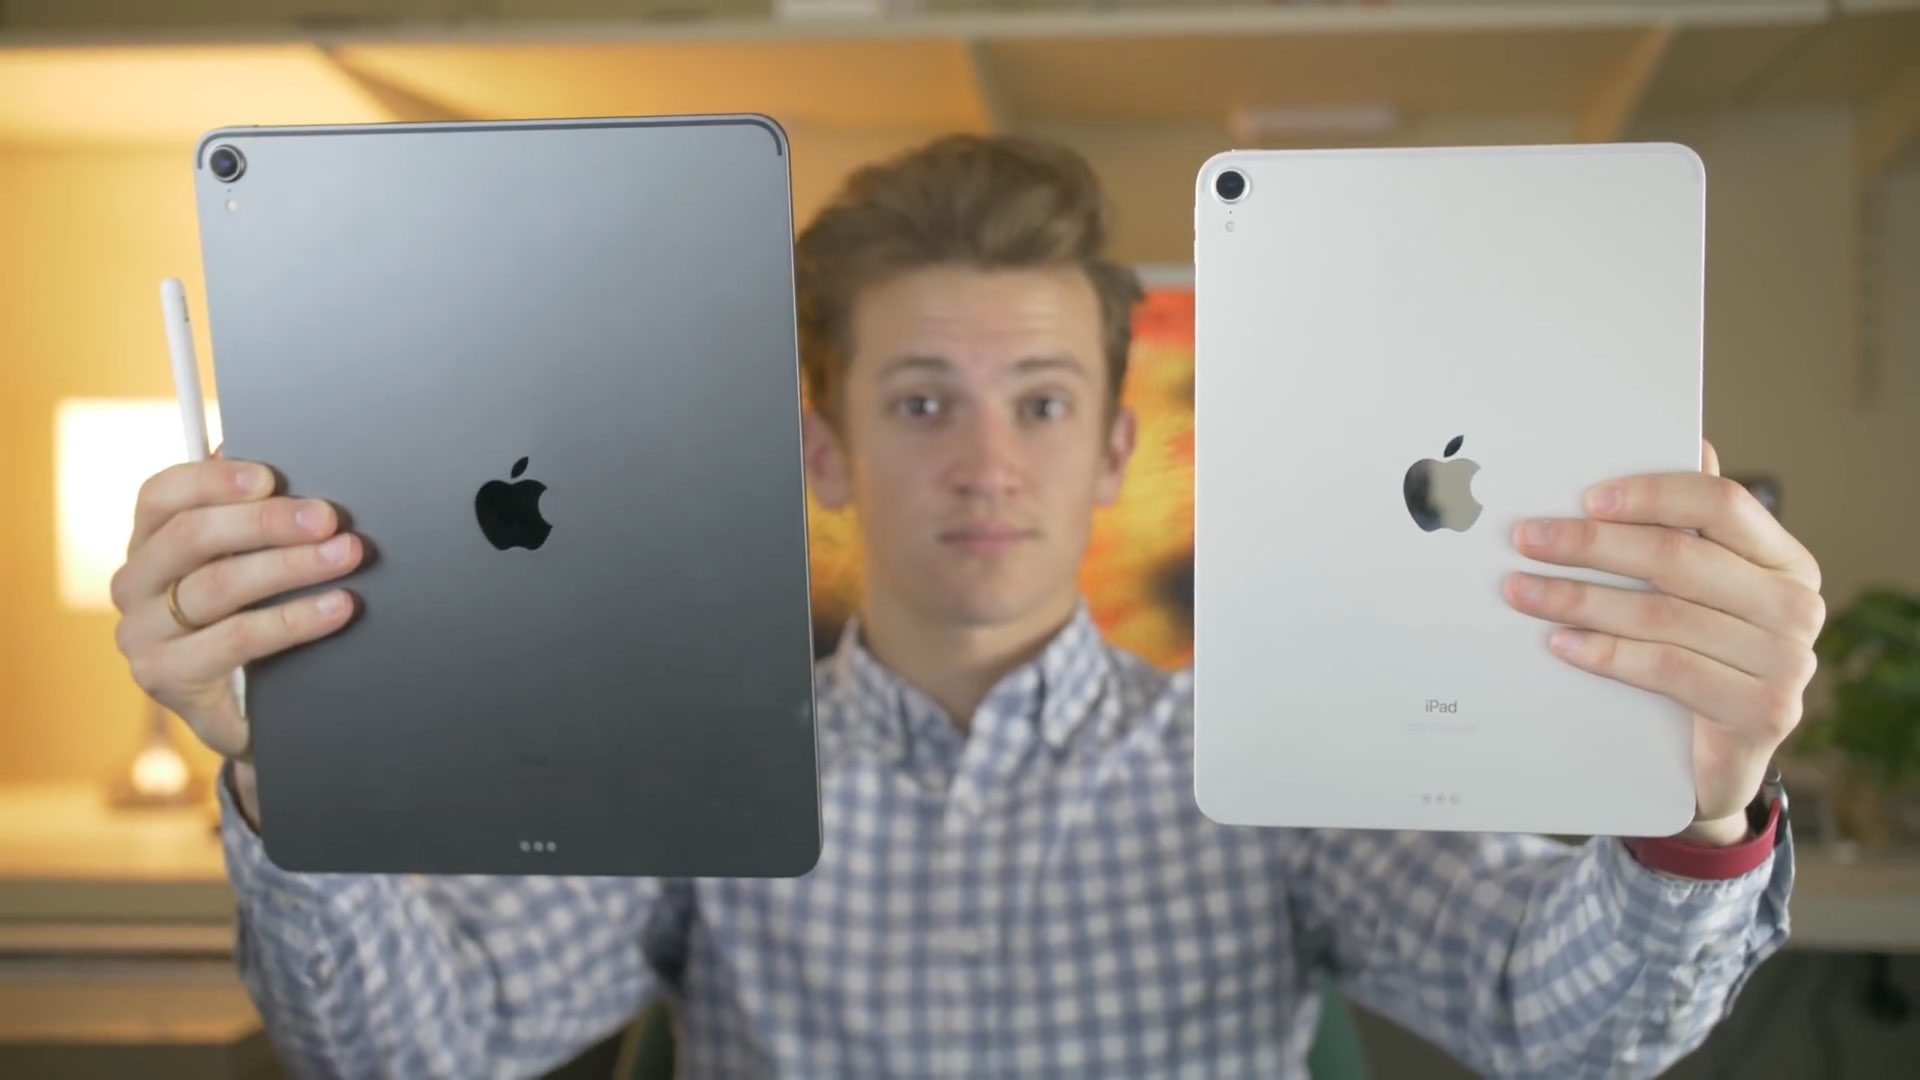 Photo showing a person holding two iPad Pro models in their hands, the bigger 12.9-inch model in the left hand and the smaller 11-inch one in their right hand